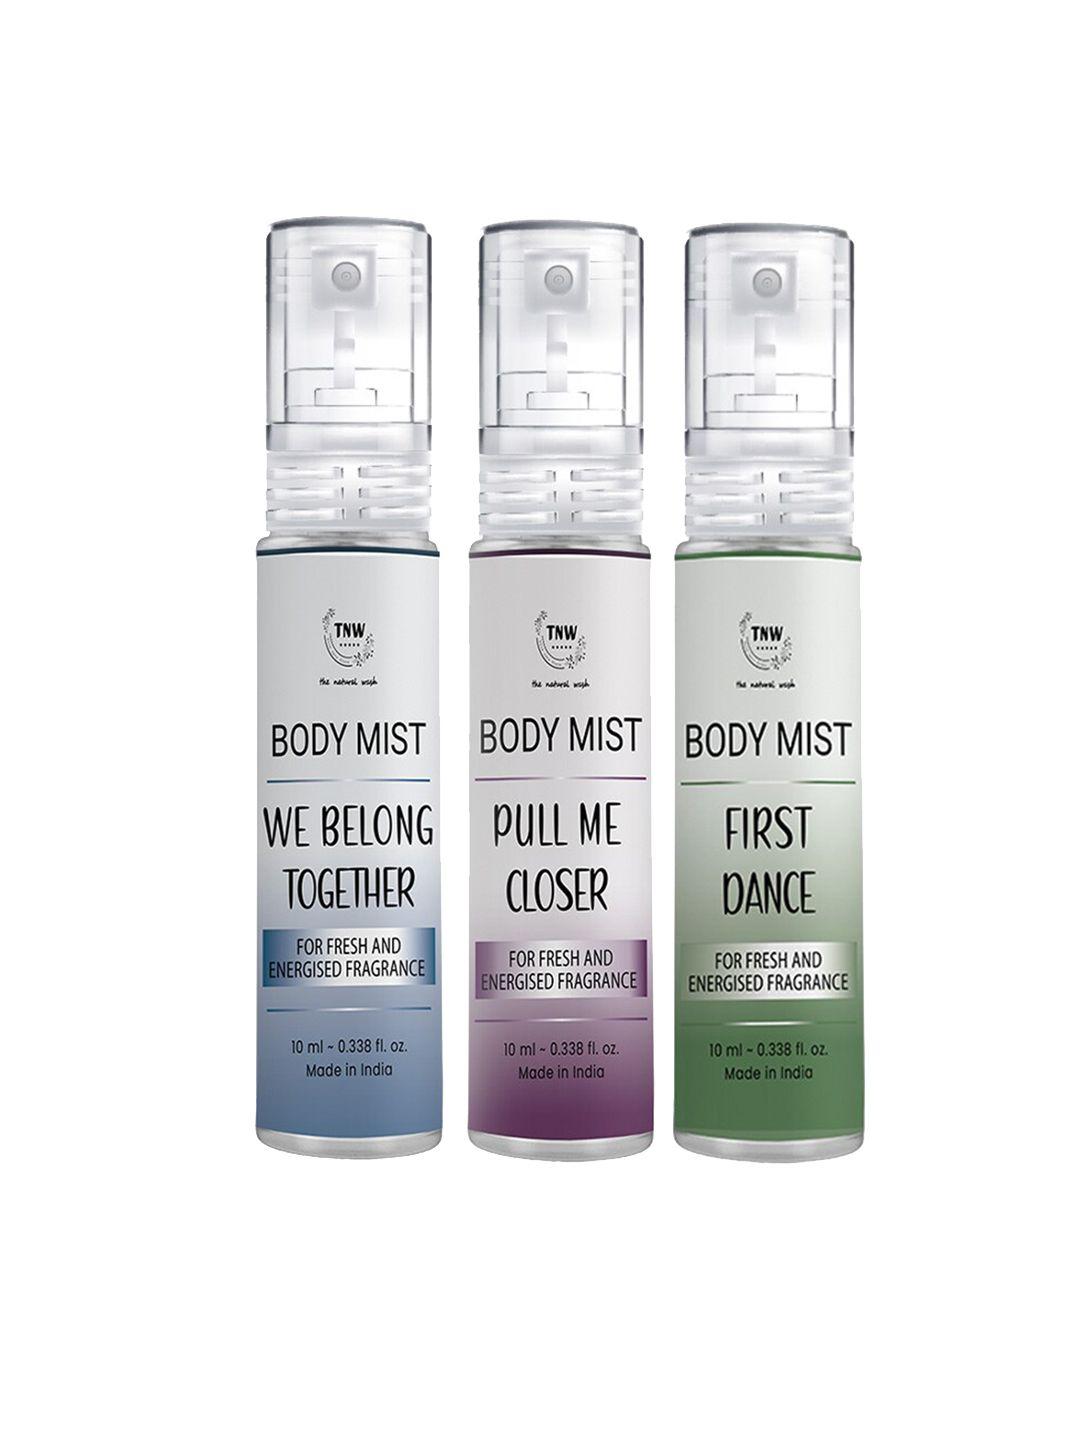 tnw the natural wash set of 3 body mist minis - 10ml each